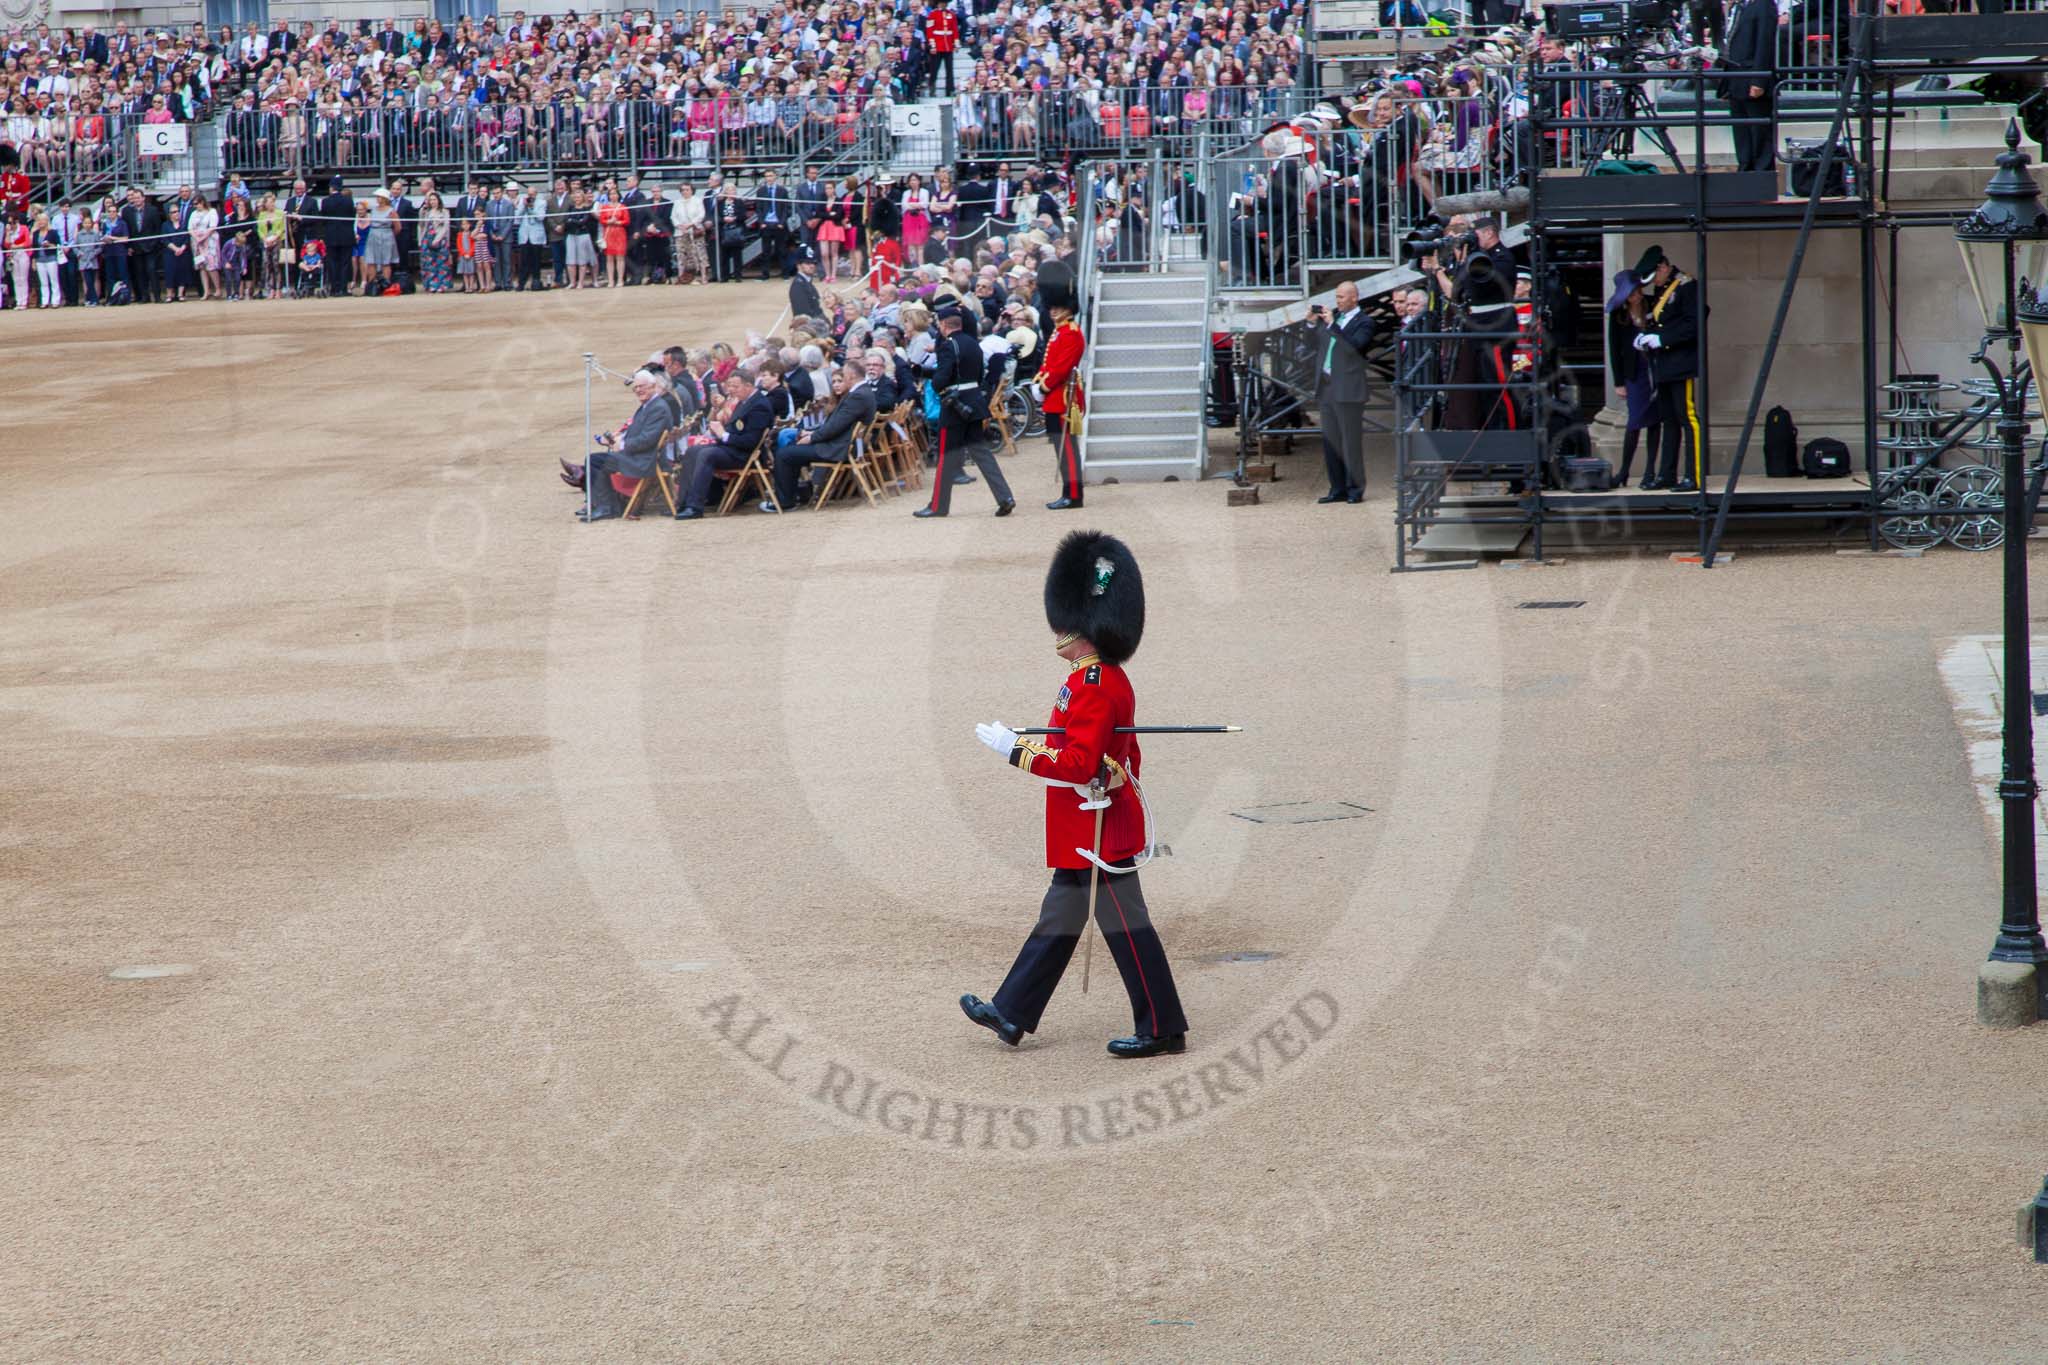 Trooping the Colour 2014.
Horse Guards Parade, Westminster,
London SW1A,

United Kingdom,
on 14 June 2014 at 10:35, image #218